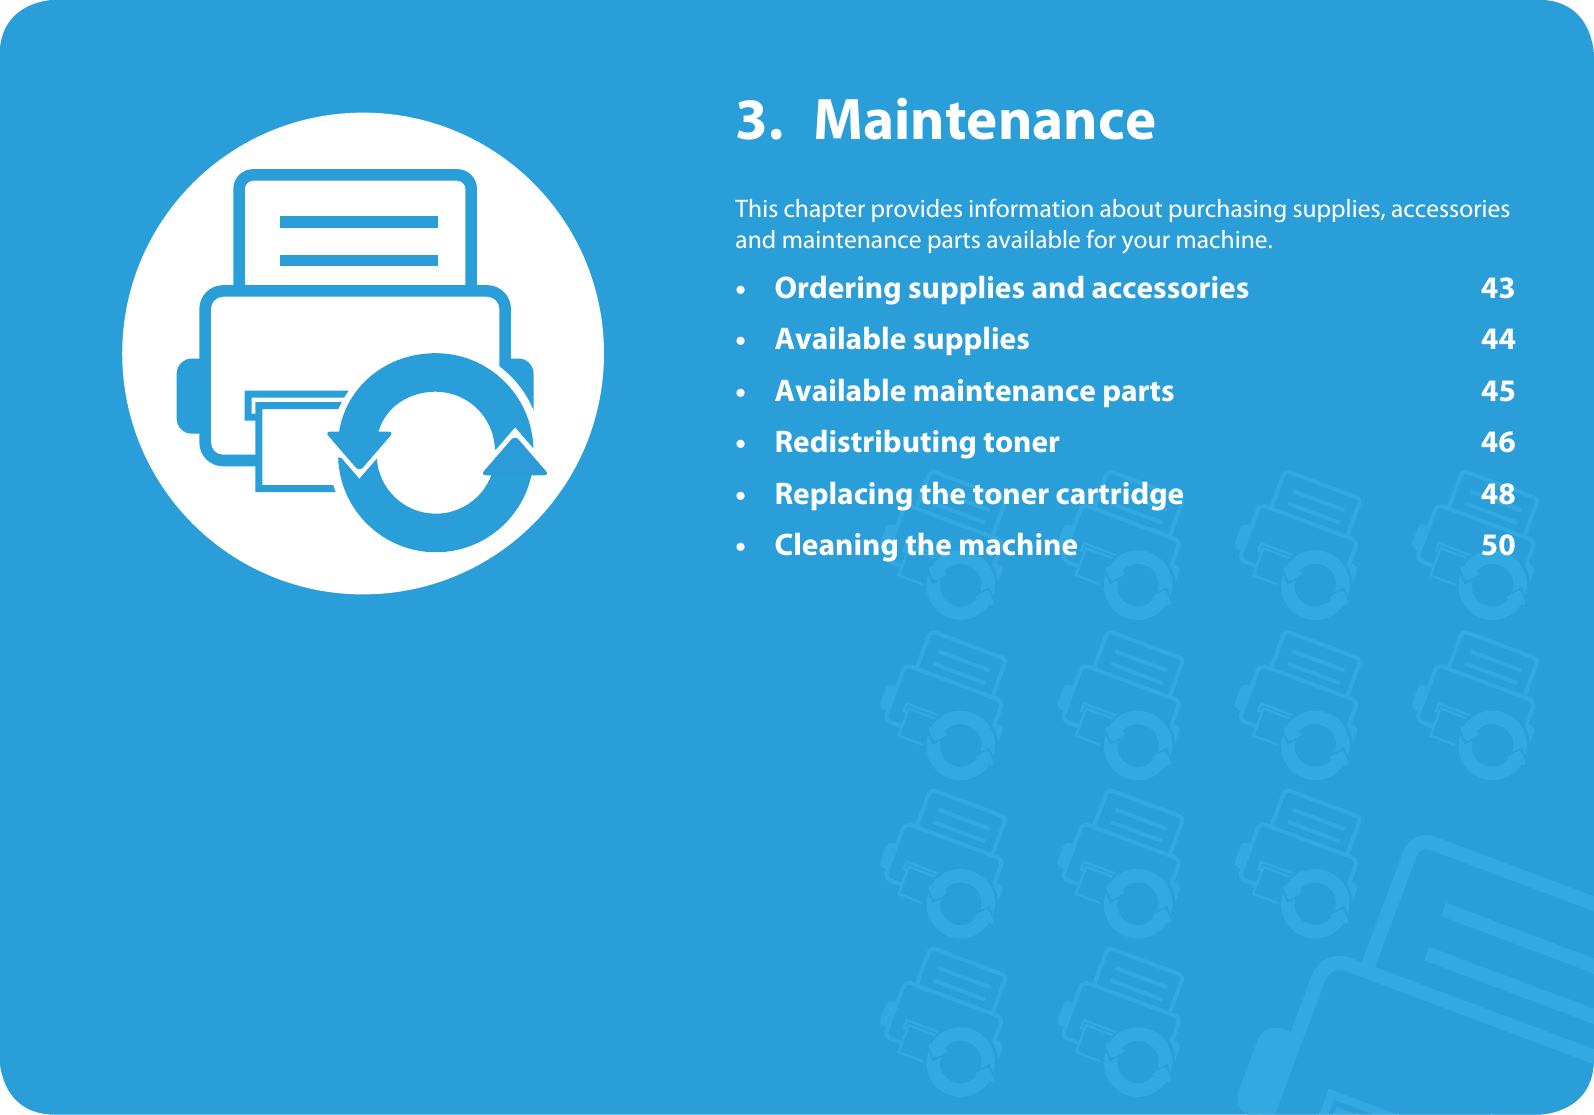 3. MaintenanceThis chapter provides information about purchasing supplies, accessories and maintenance parts available for your machine.• Ordering supplies and accessories 43• Available supplies 44• Available maintenance parts 45• Redistributing toner 46• Replacing the toner cartridge 48• Cleaning the machine 50